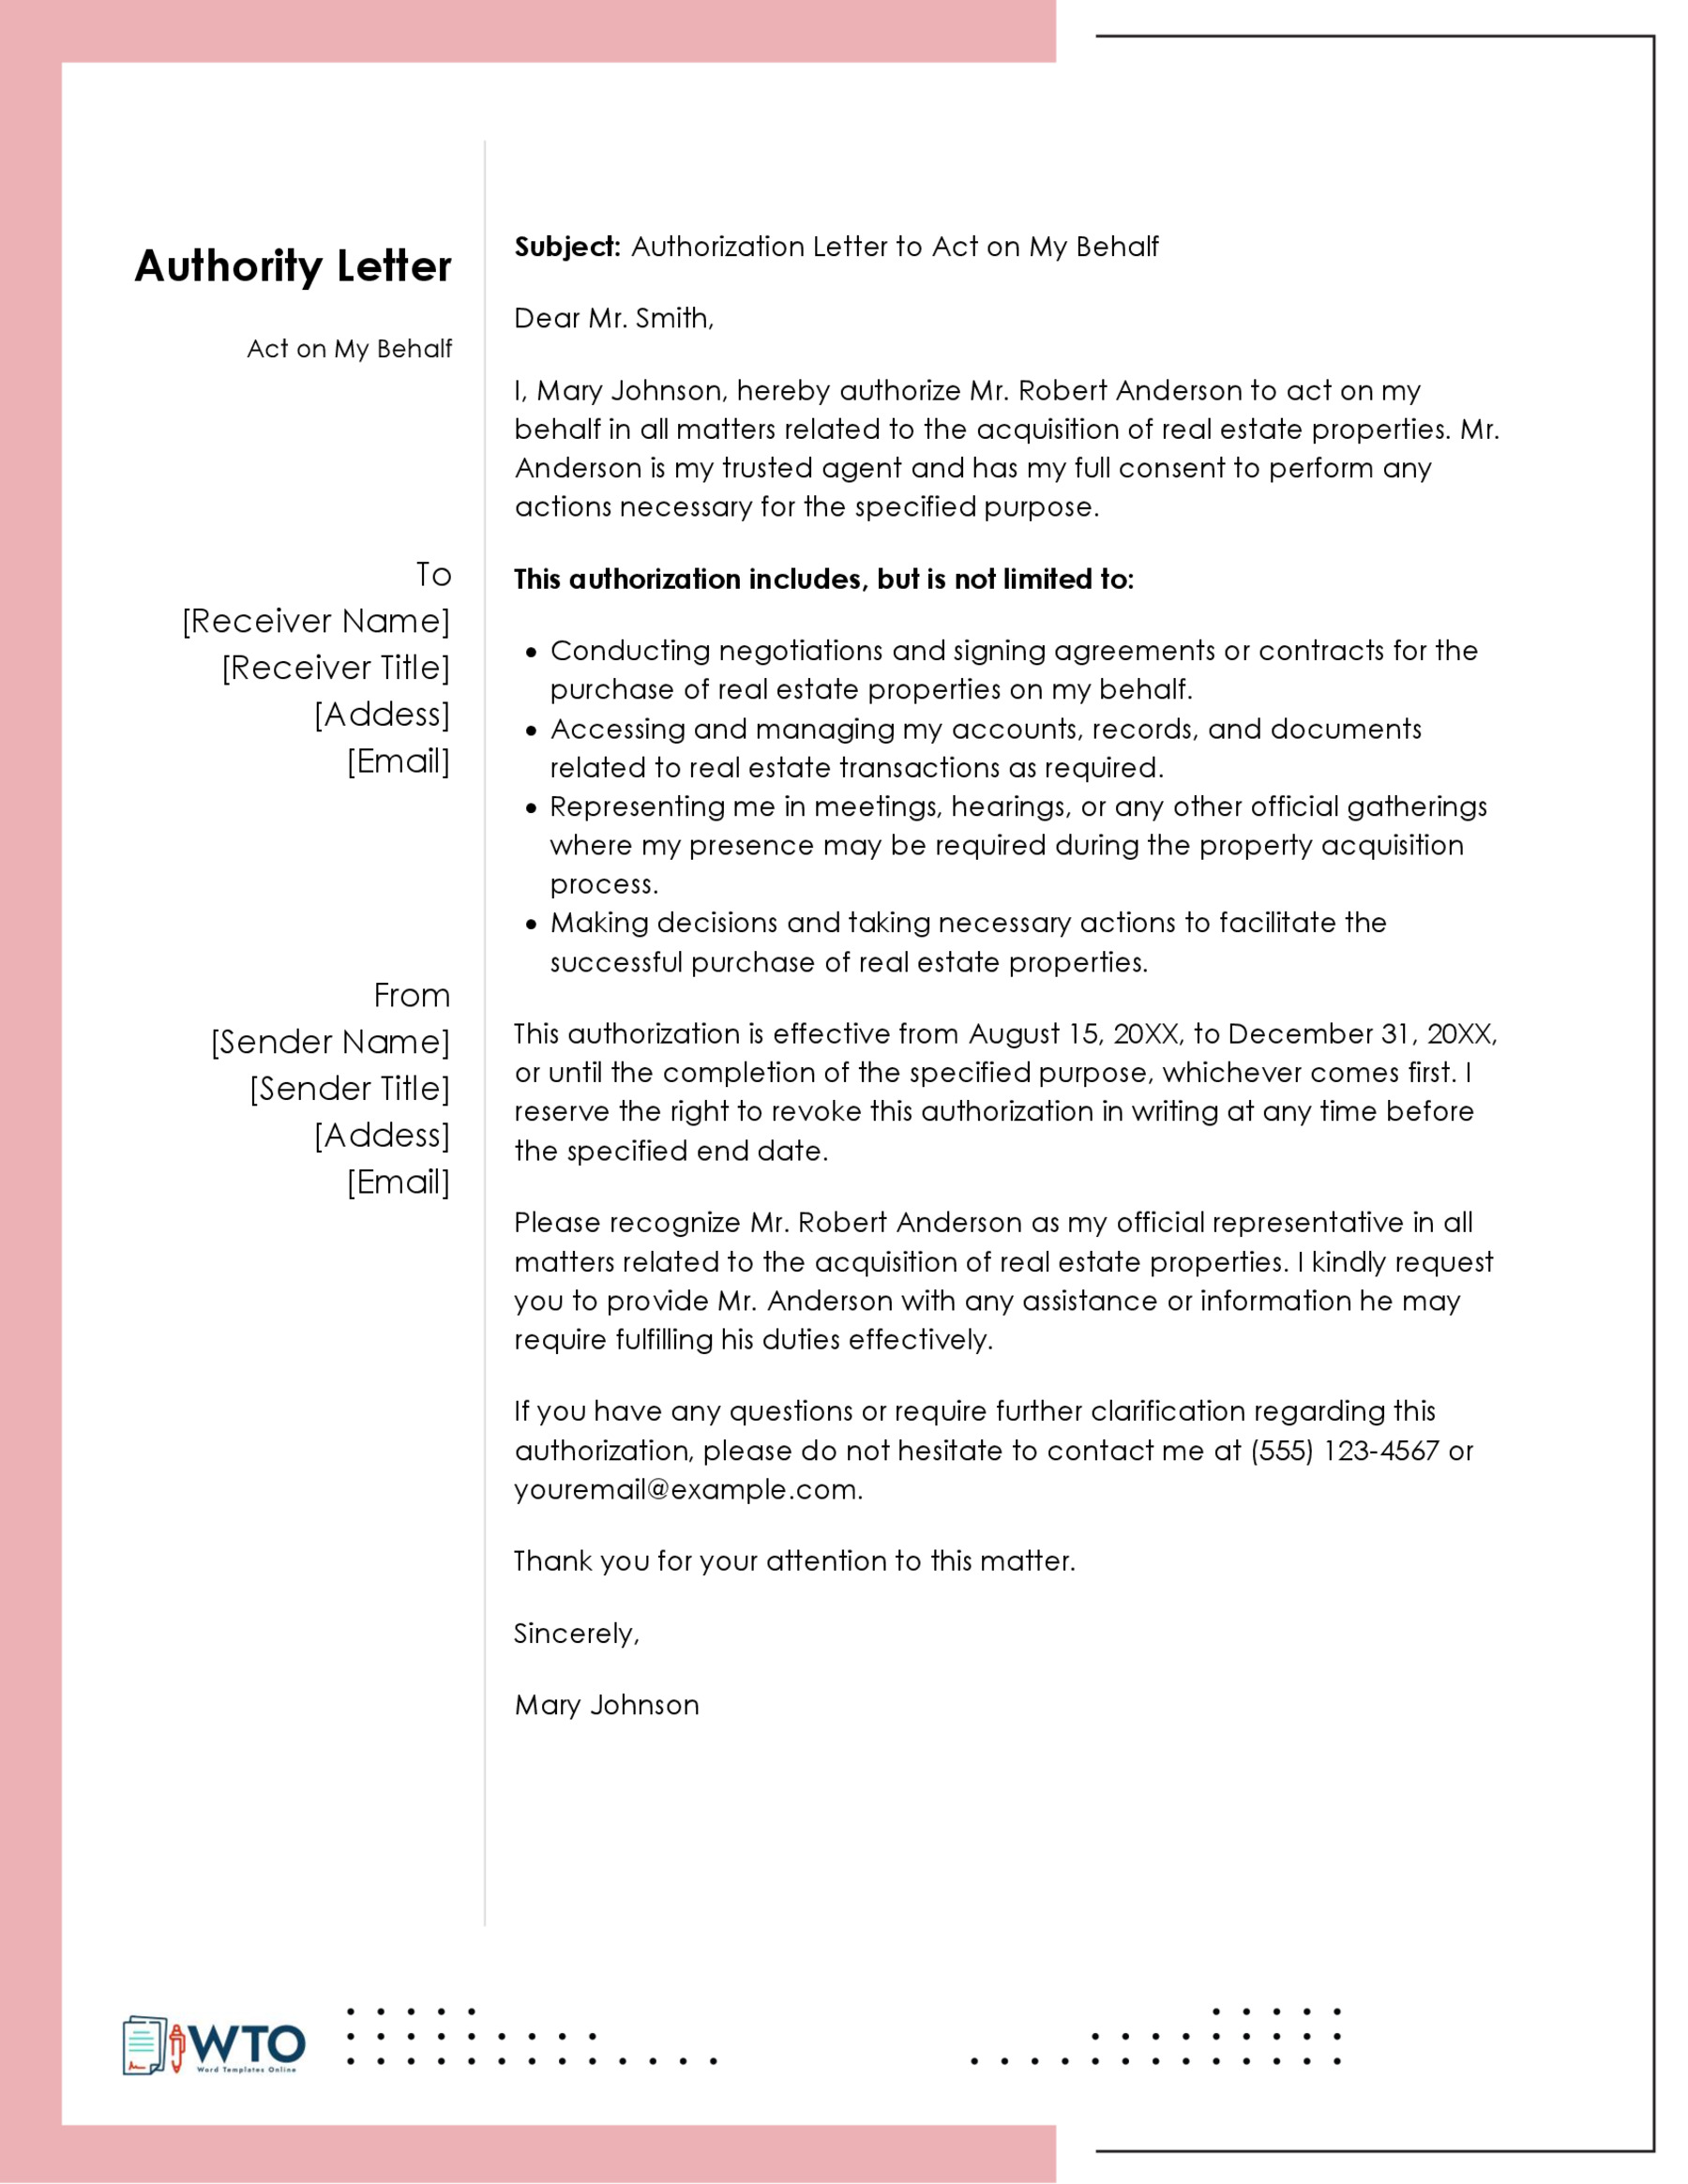 Free Downloadable Act on Behalf Authorization Letter Sample 03 for Word Document